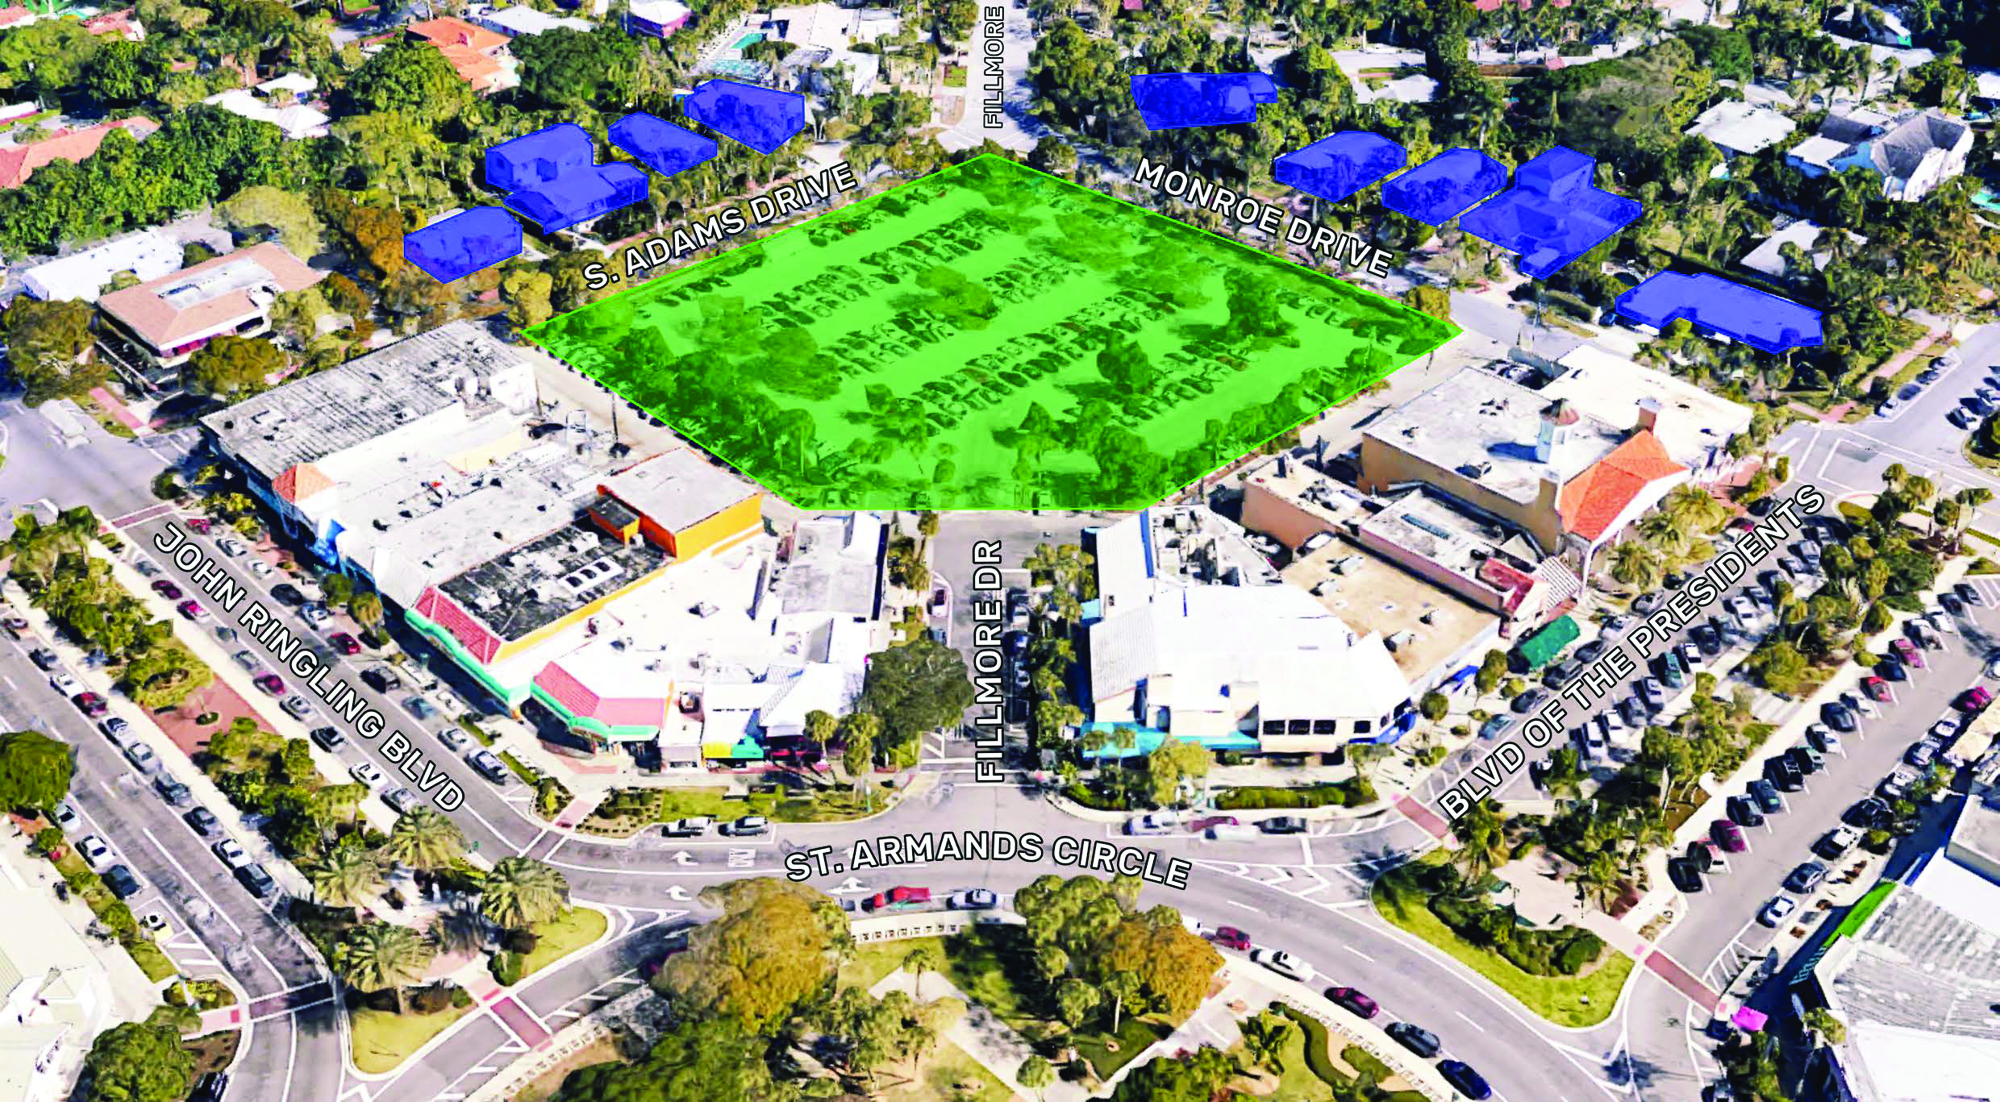 The concept proposal would leave parking room while developing the parking lot in the southeast quadrant of St. Armands Circle. 